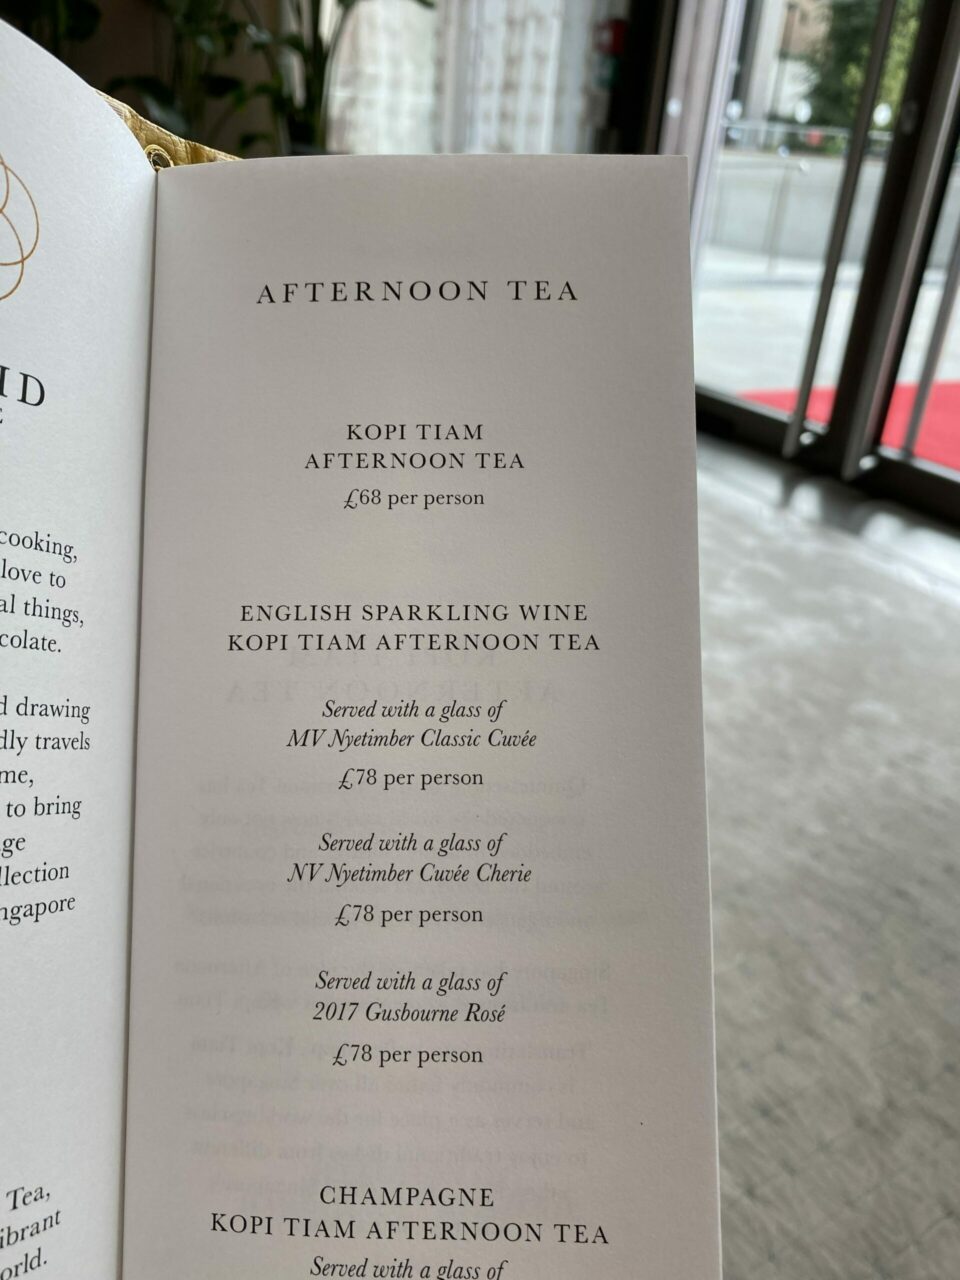 The Orchid Lounge Afternoon Tea - Pan Pacific hotel London's restaurants Menu 